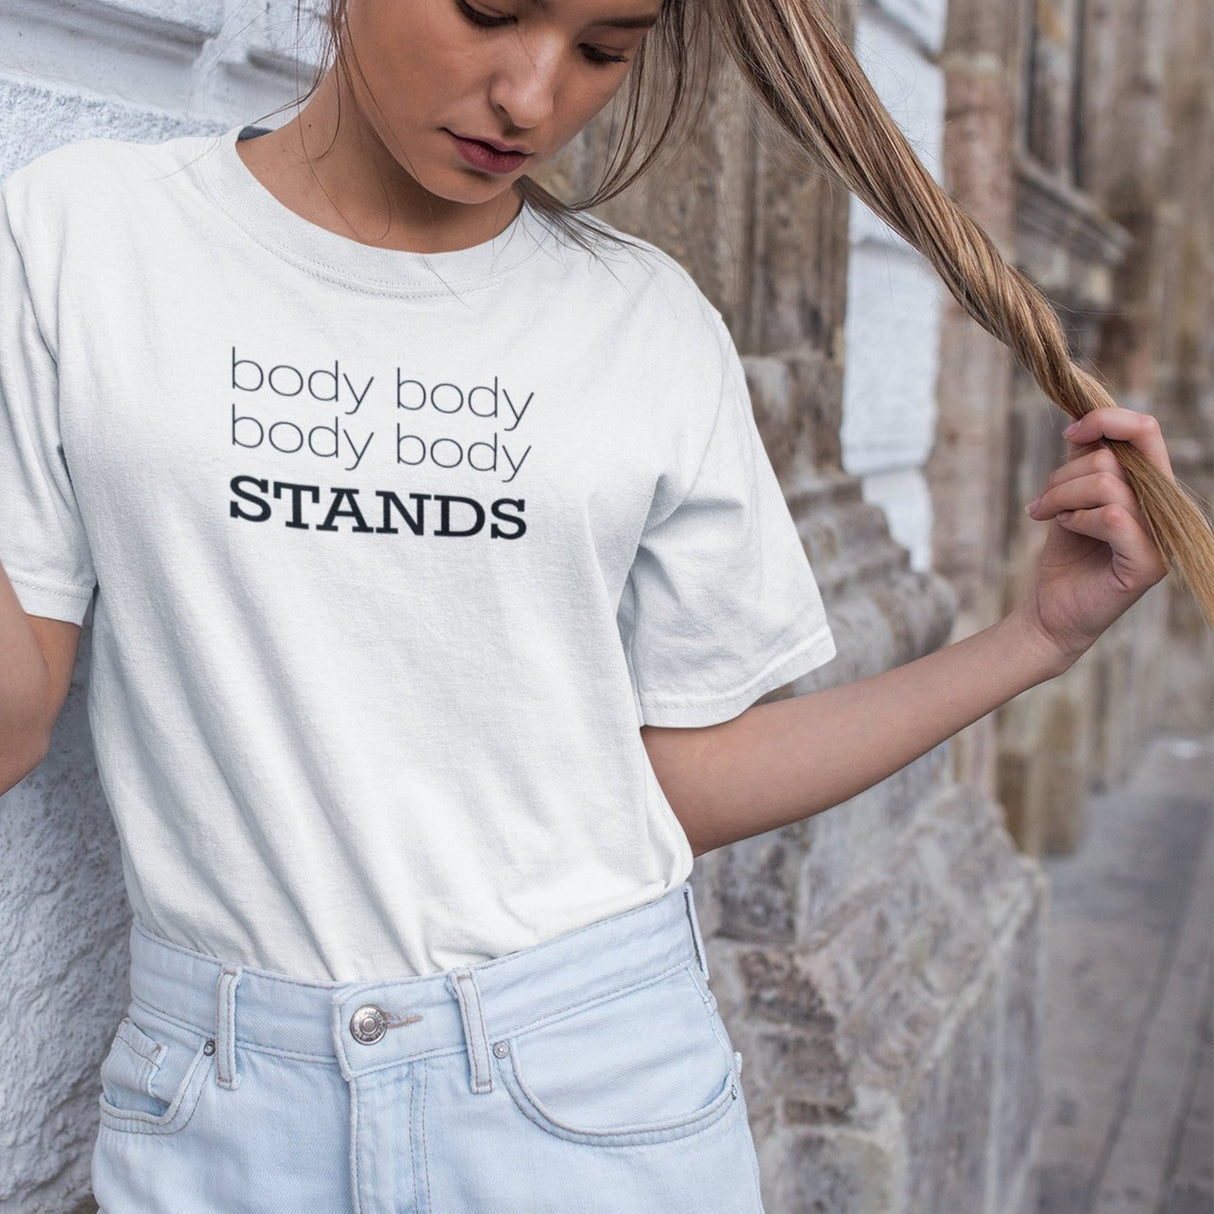 body-body-body-body-understands-philosophy-tee-funny-t-shirt-cool-tee-funny-t-shirt-mind-games-tee#color_white